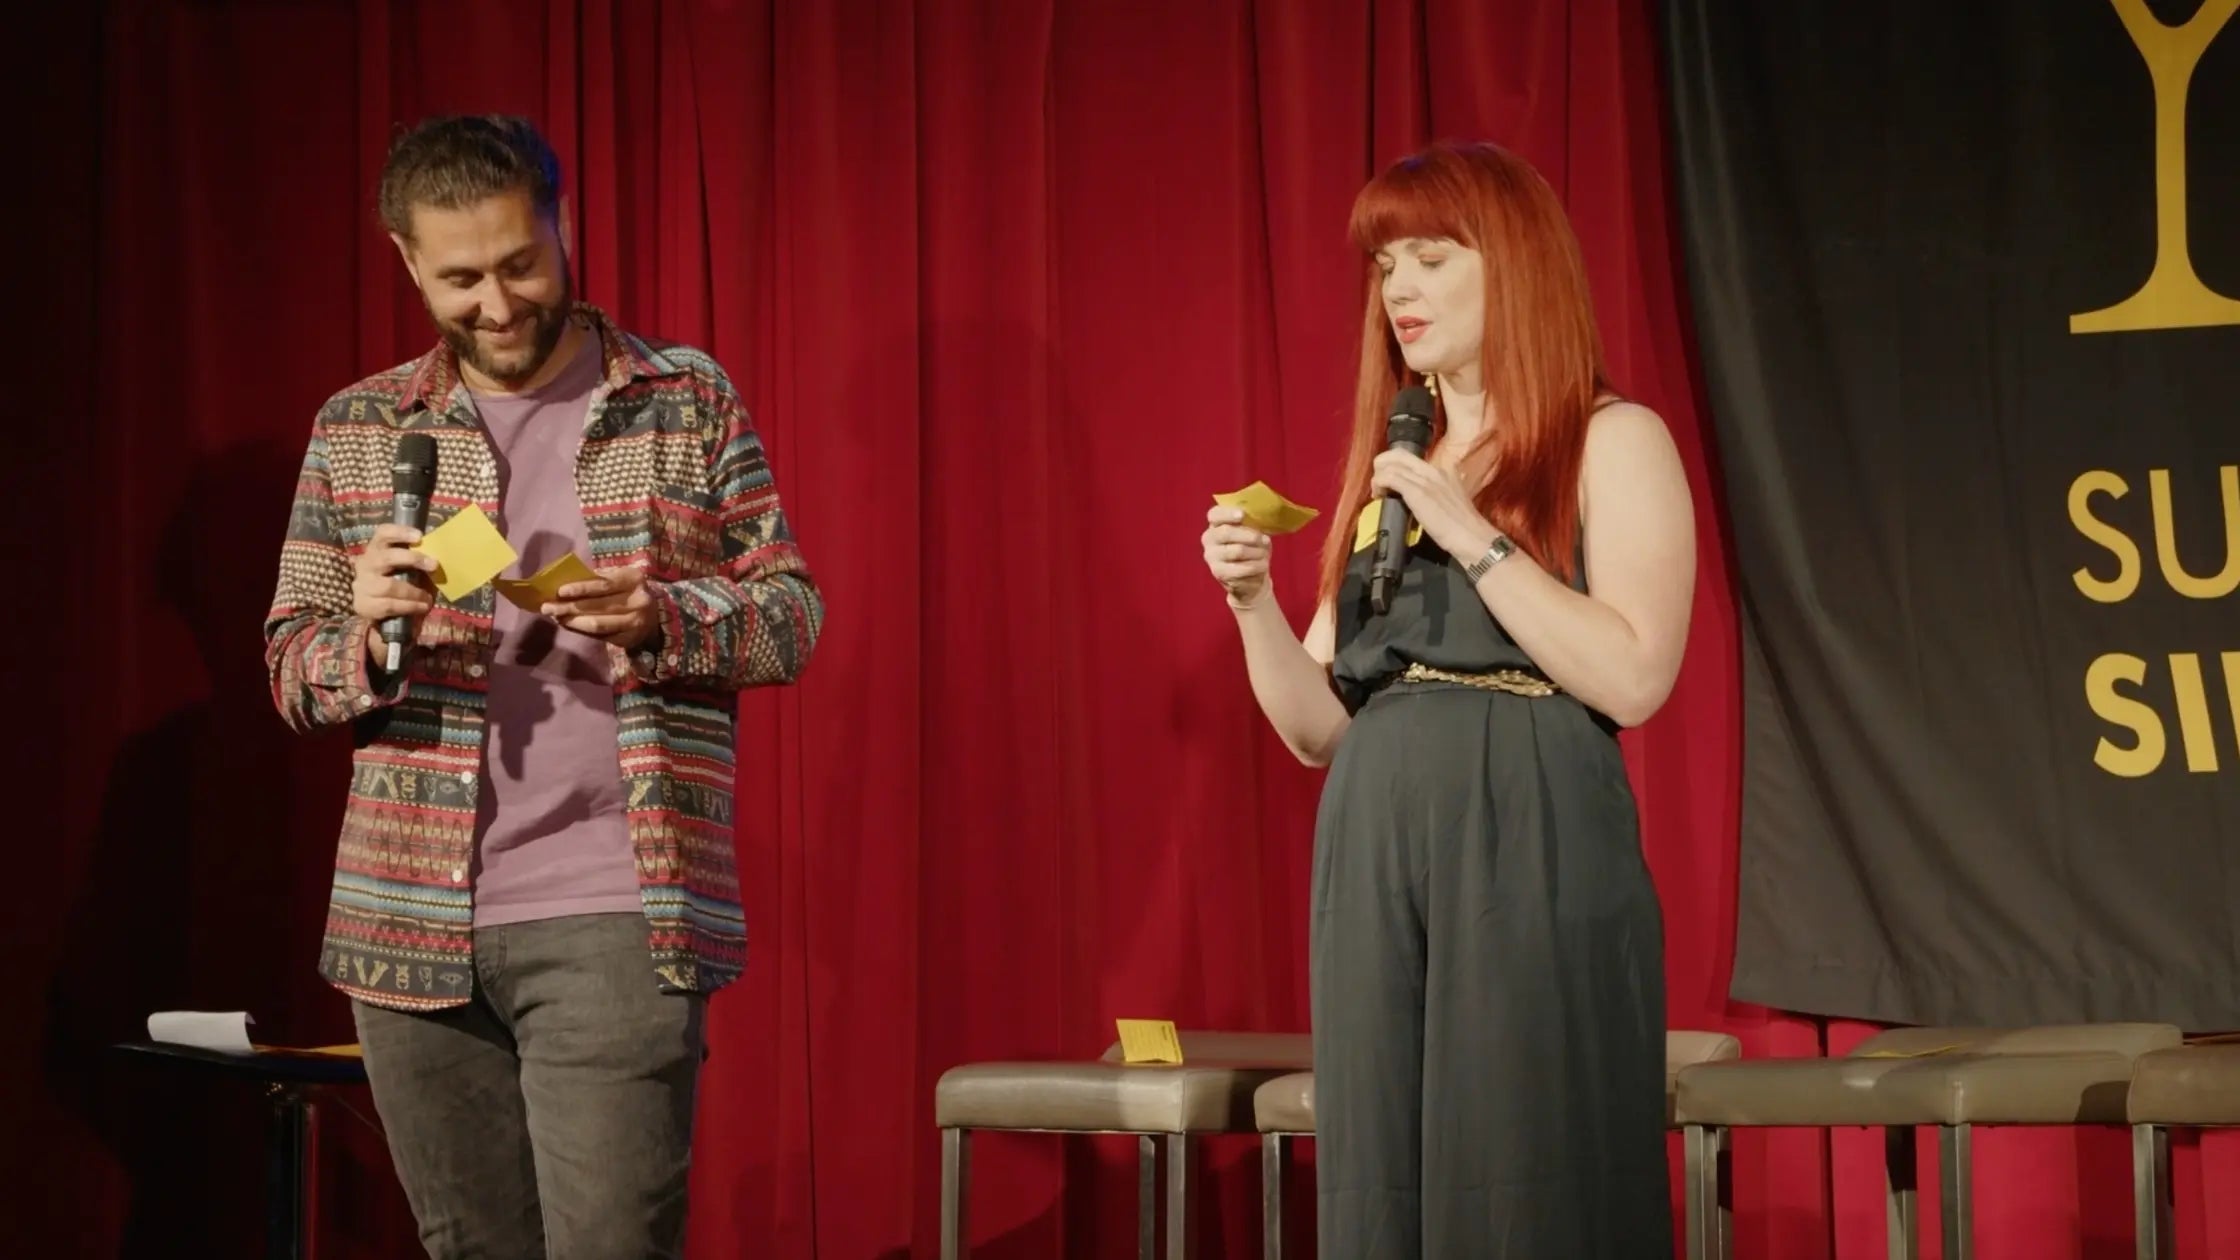 hilarious and strange dating stories from our Sunday Singles comedy dating game show event.